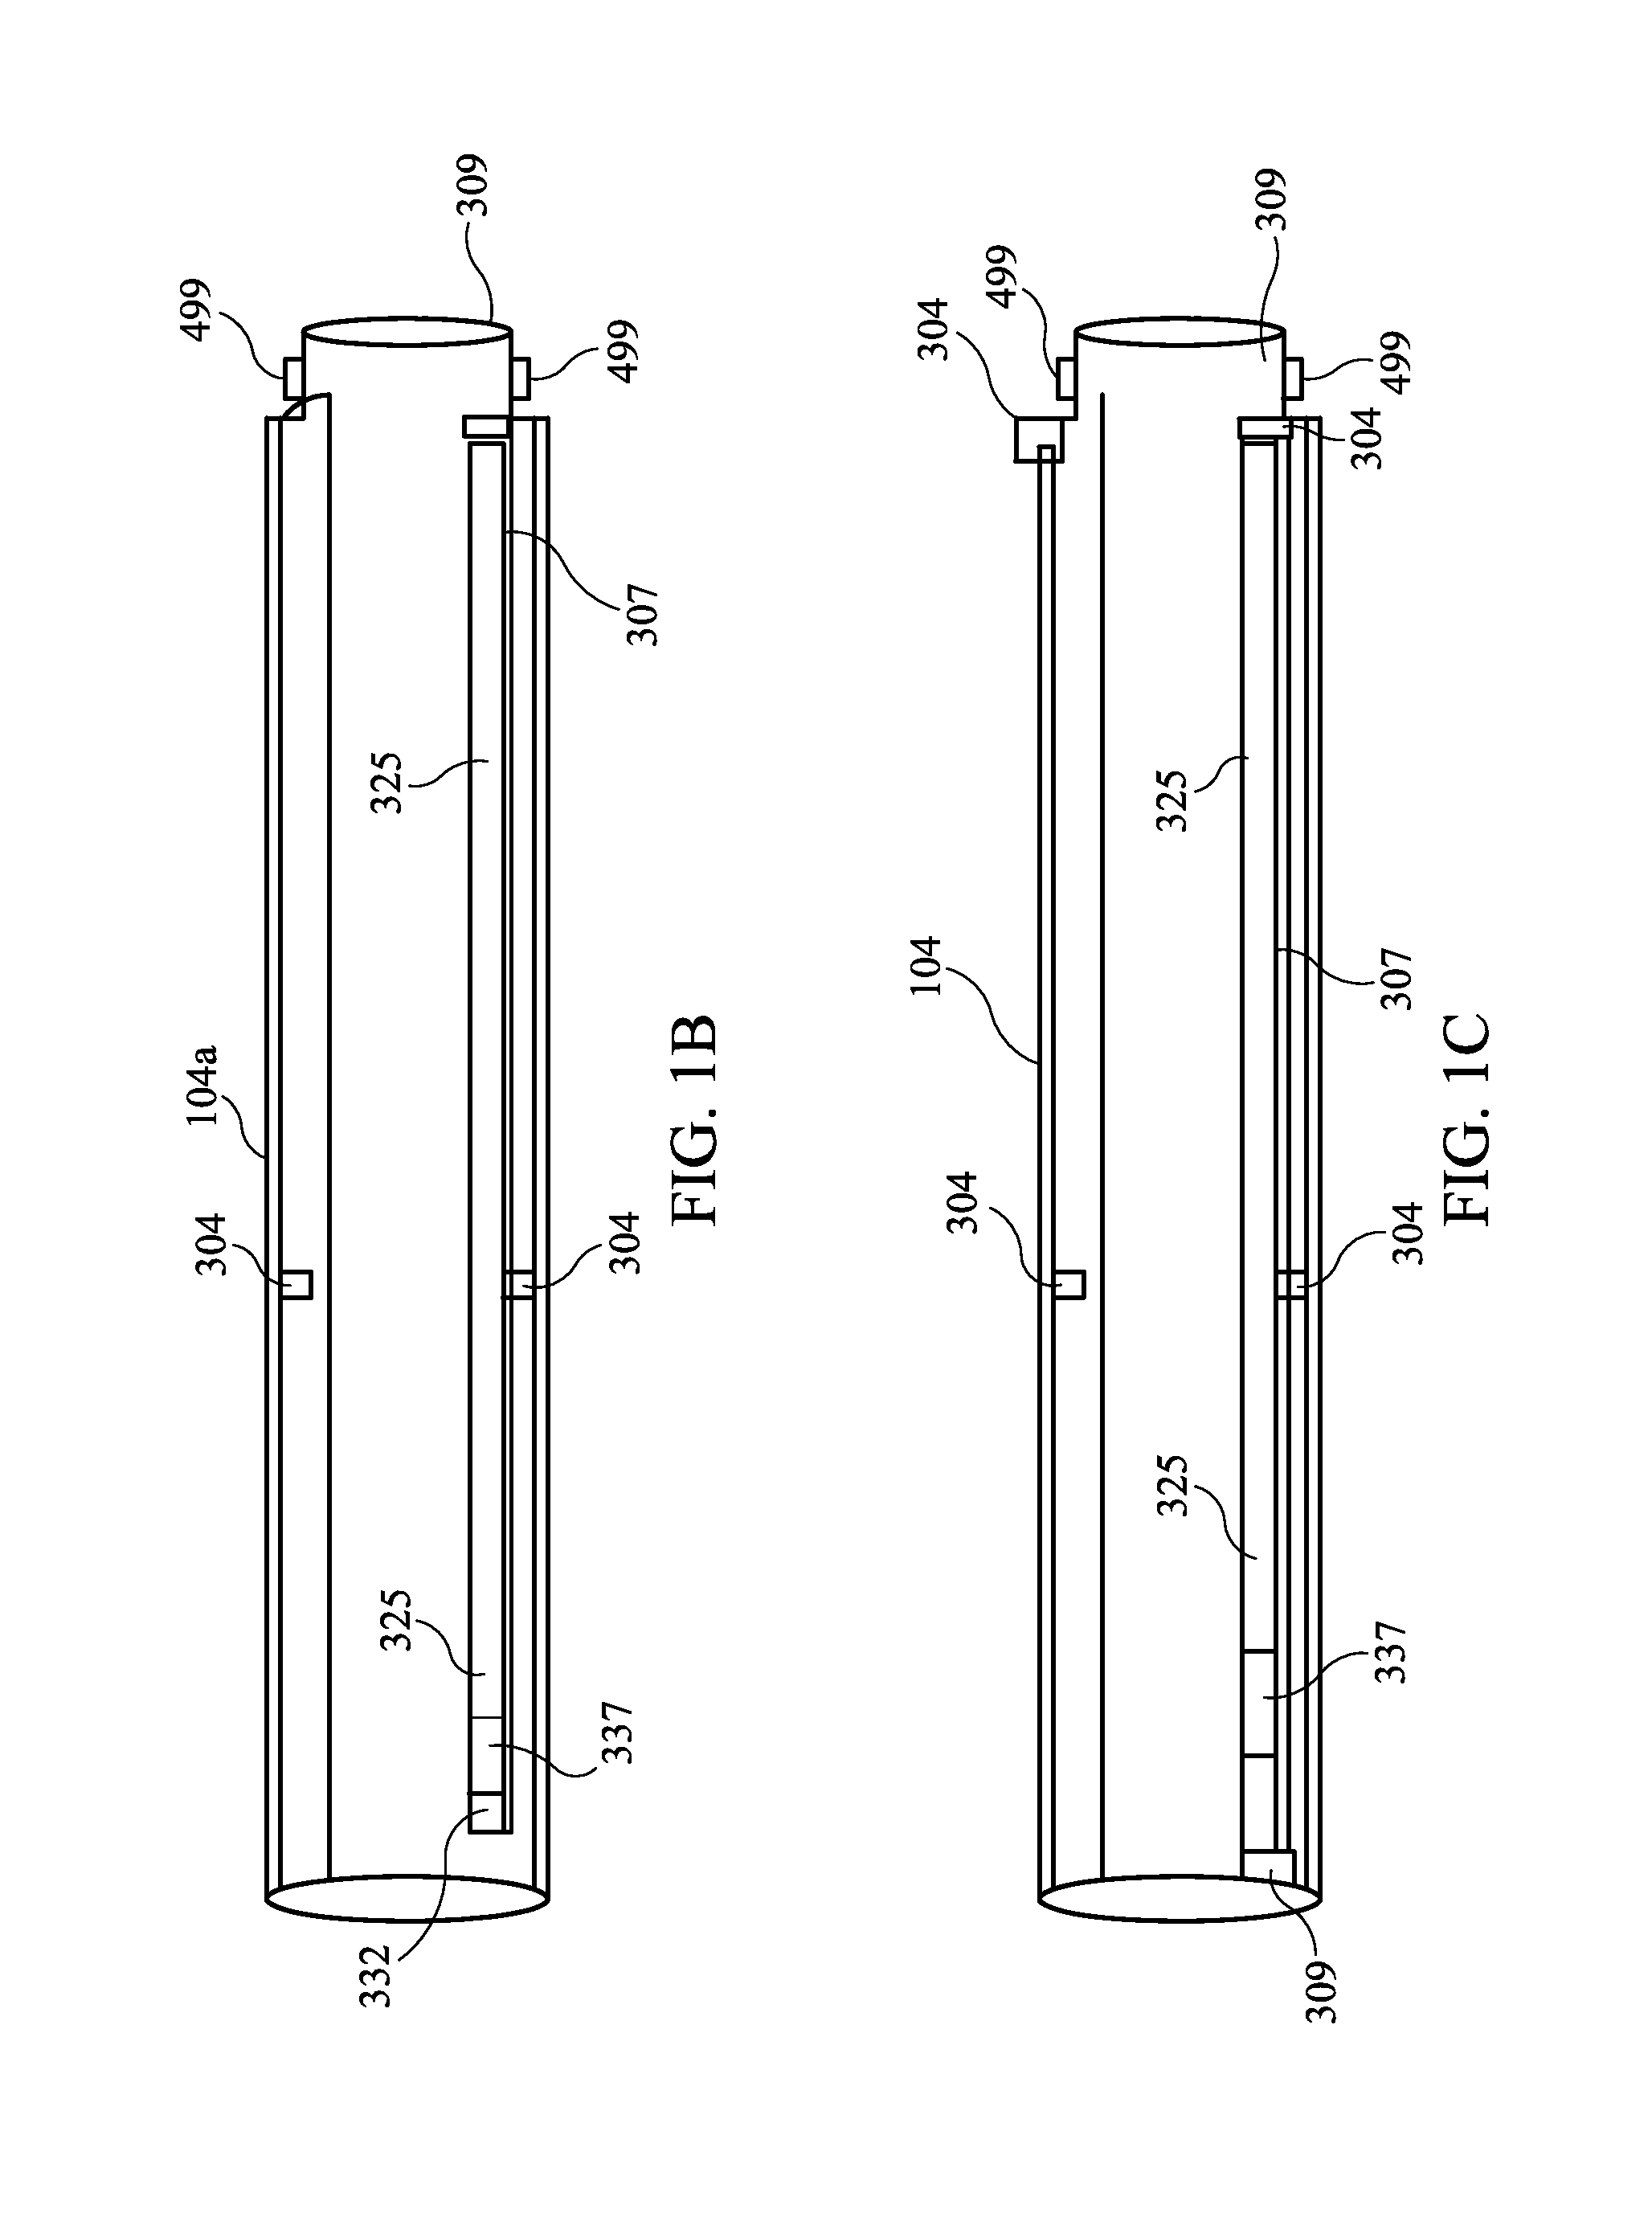 Drill bit and cylinder body device, assemblies, systems and methods